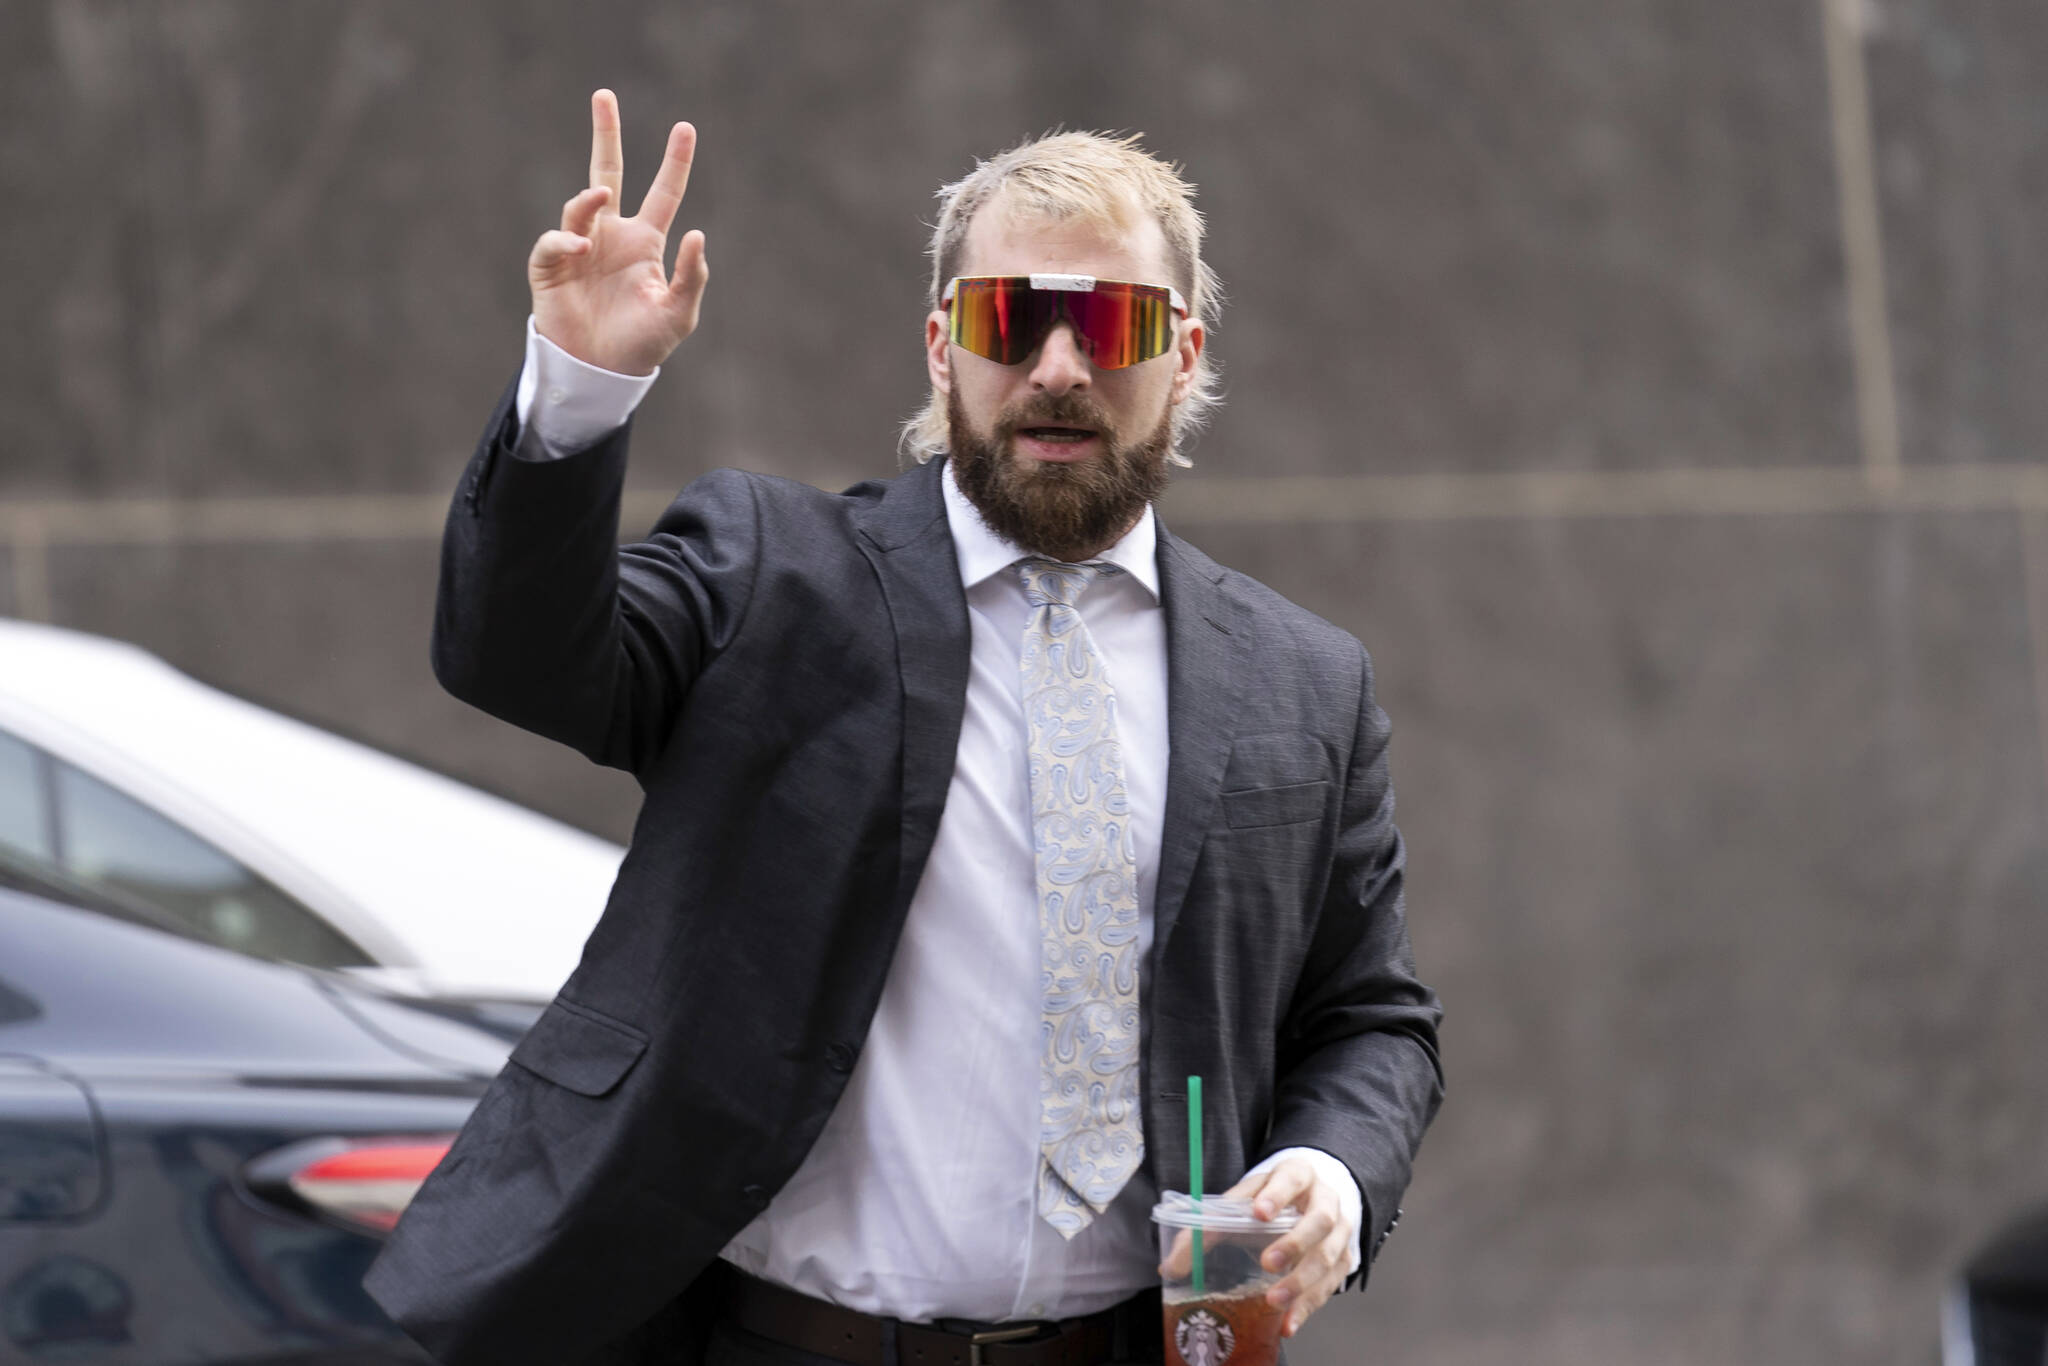 Anthime “Baked Alaska” Gionet, who livestreamed himself storming the U.S. Capitol in Jan. 6, arrives at federal court in Washington, Tuesday, Jan. 10, 2023. (AP Photo/Jose Luis Magana)